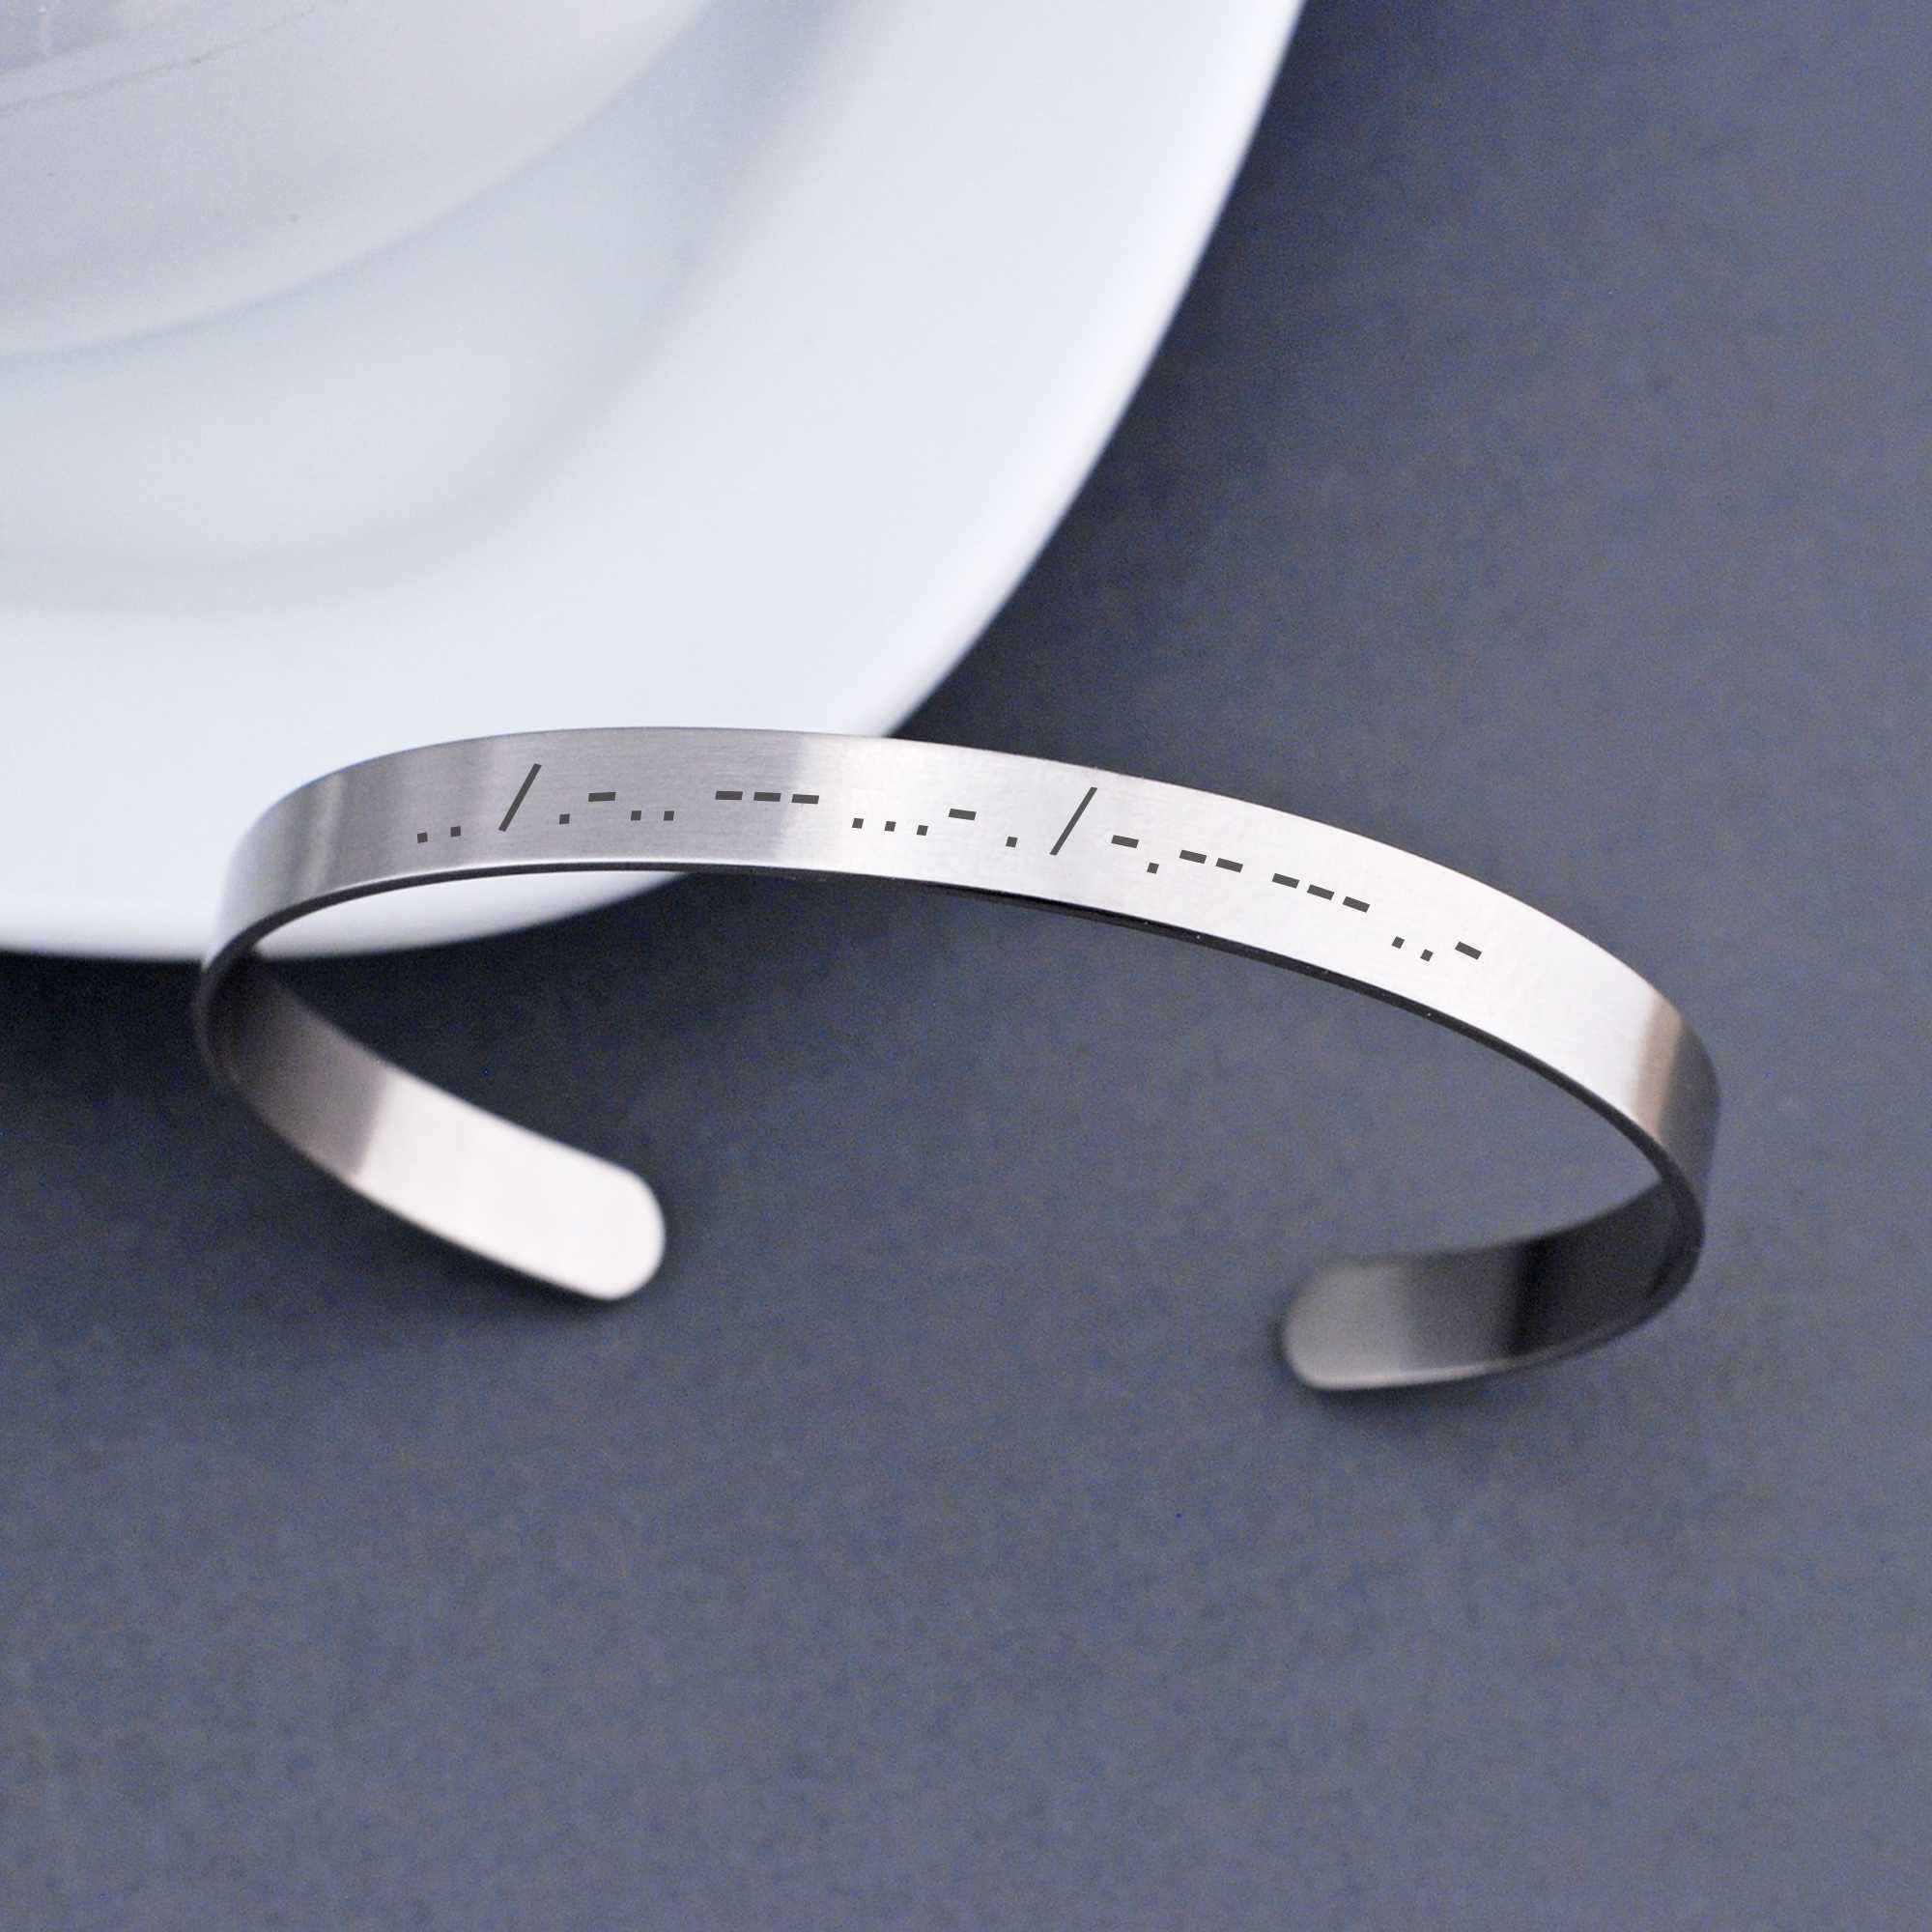 Wear a secret message in plain sight with our Morse Code Cuff Bracelet. It is engraved with the morse code translation of up to 20 characters. The adjustable stainless steel bracelet can also hold a second morse code message of 20 characters or a message of up to 50 standard characters on the inside surface. Made by Love, Georgie.